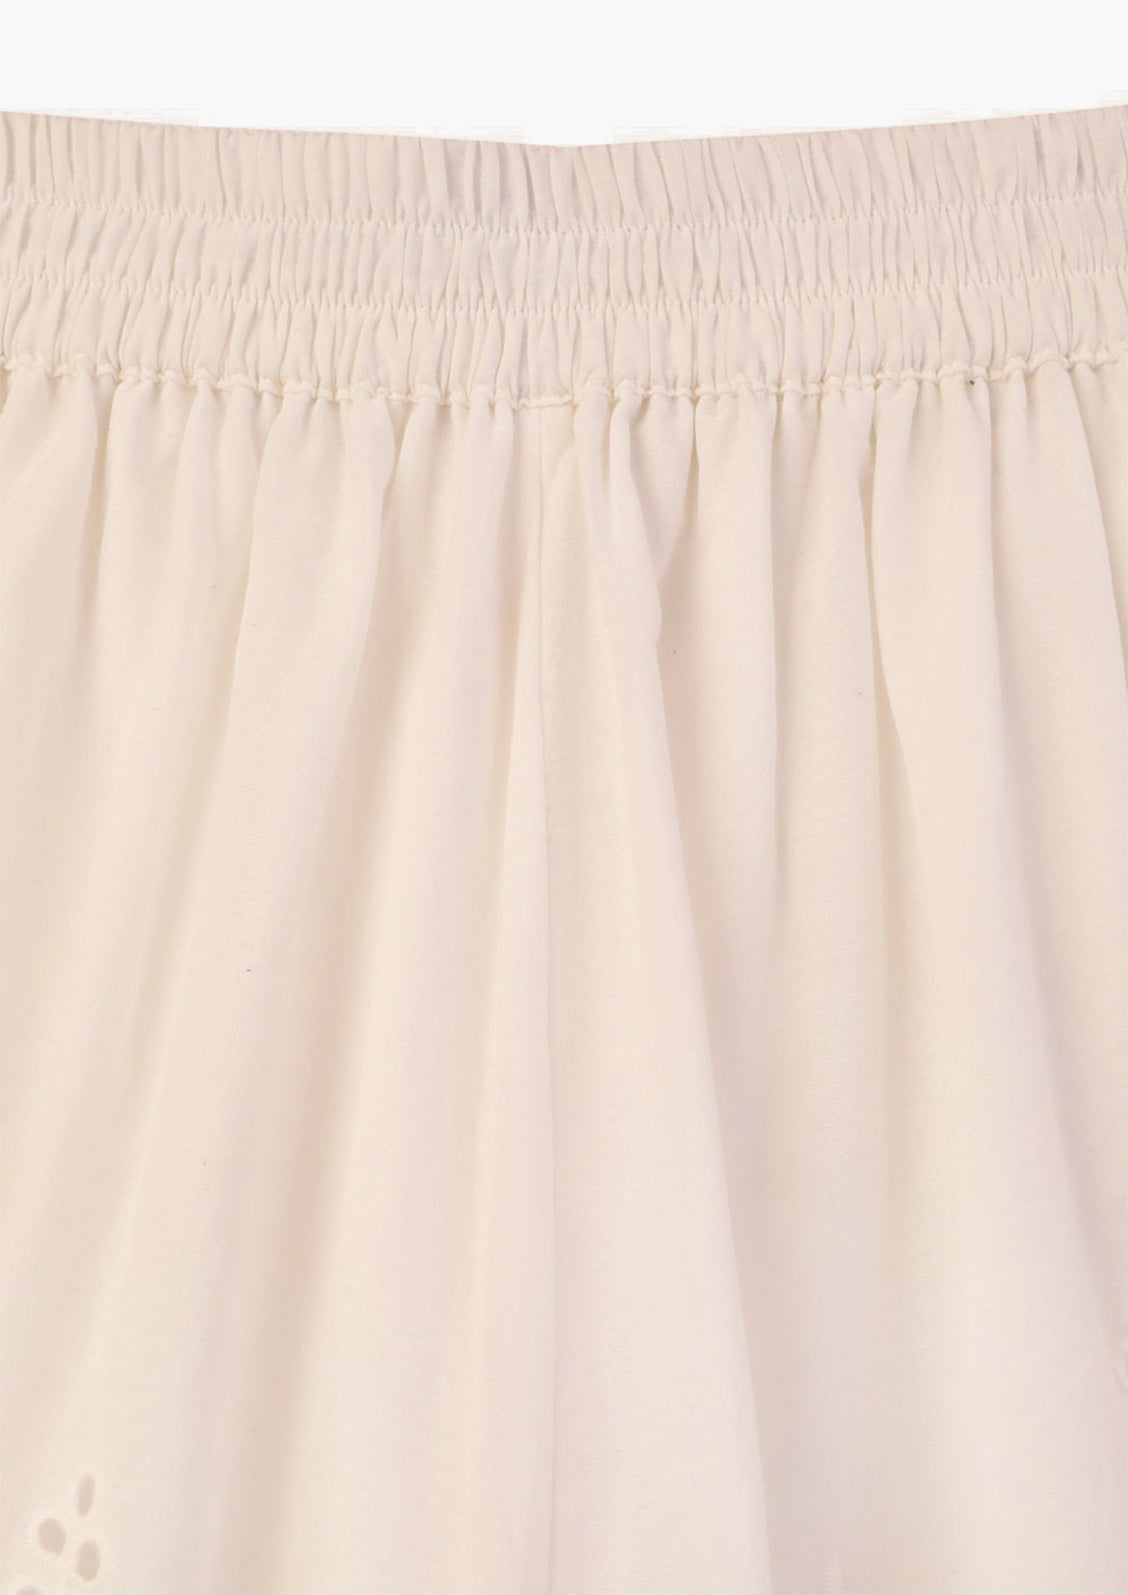 A pair of white cotton lacy shorts with elasticized waistband.